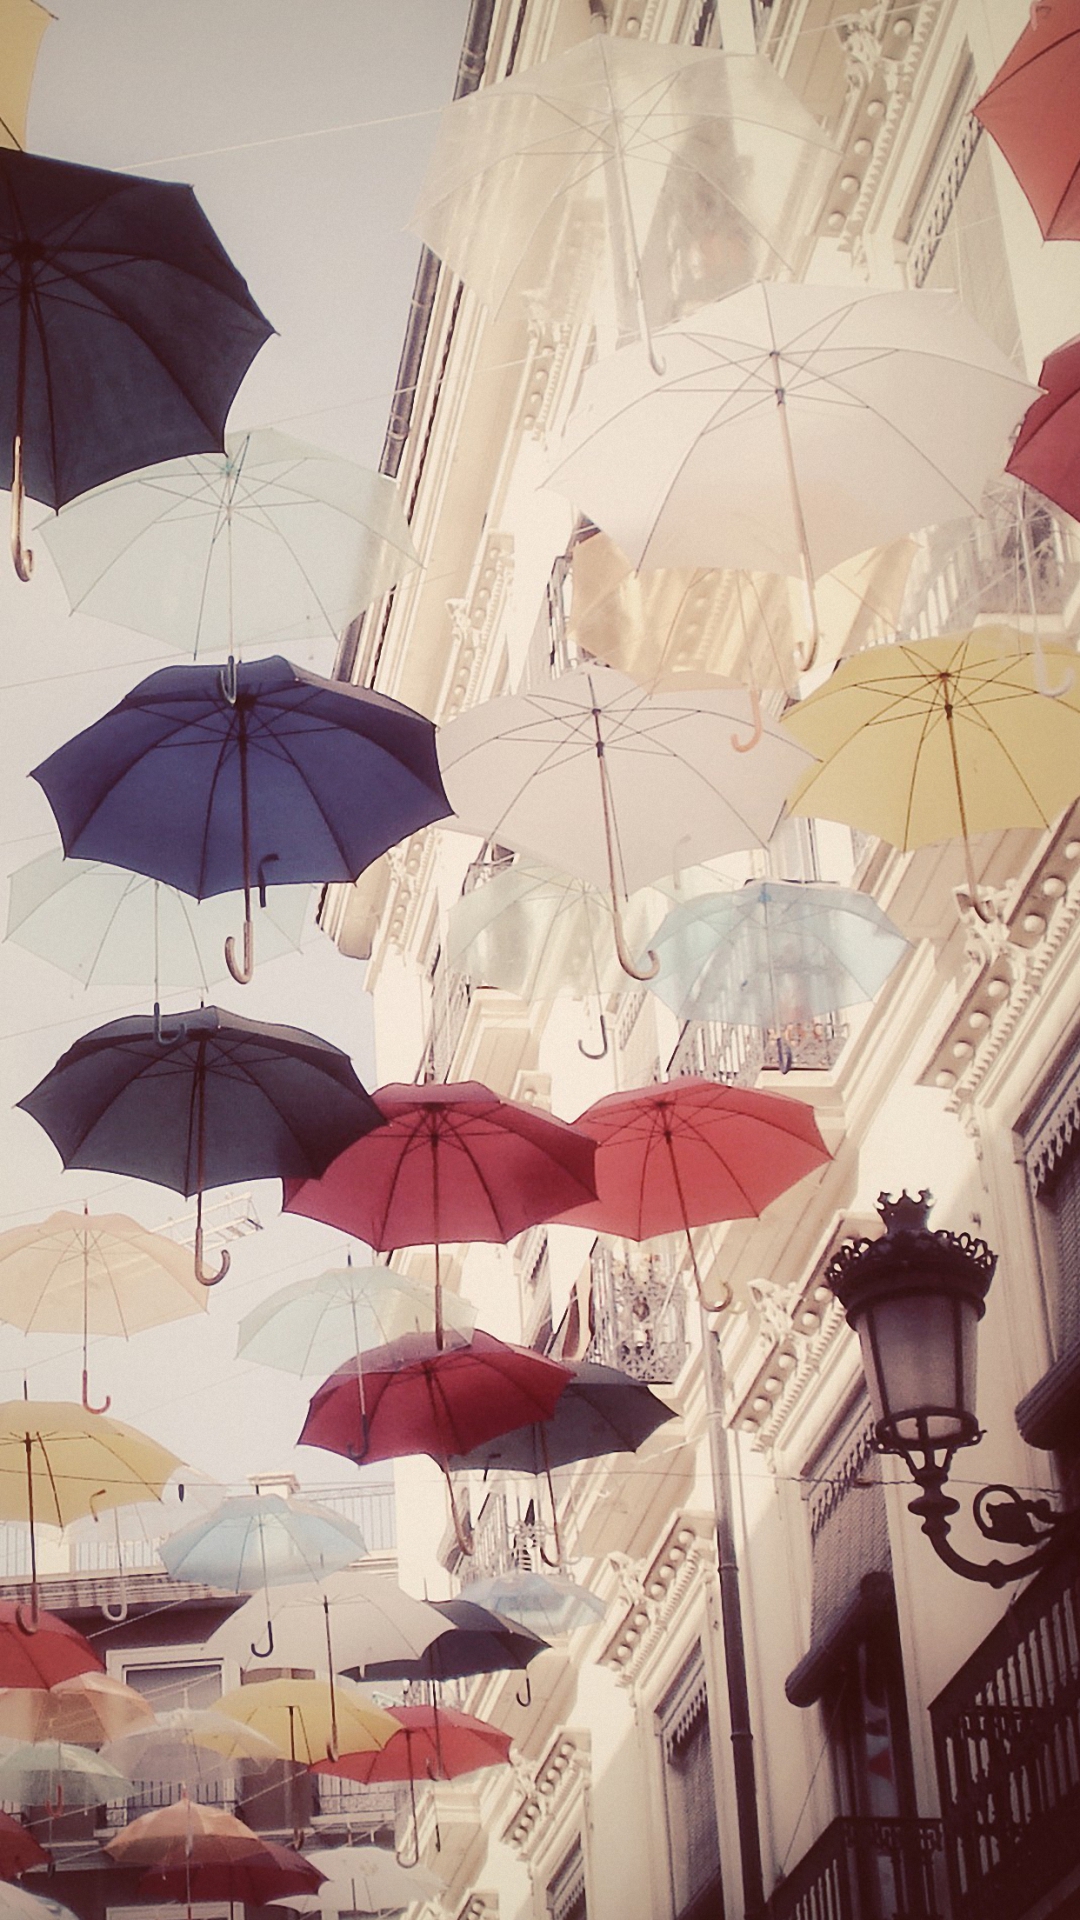 HD Cool Flying Umbrellas Wallpaper For iPhone 6s Plus